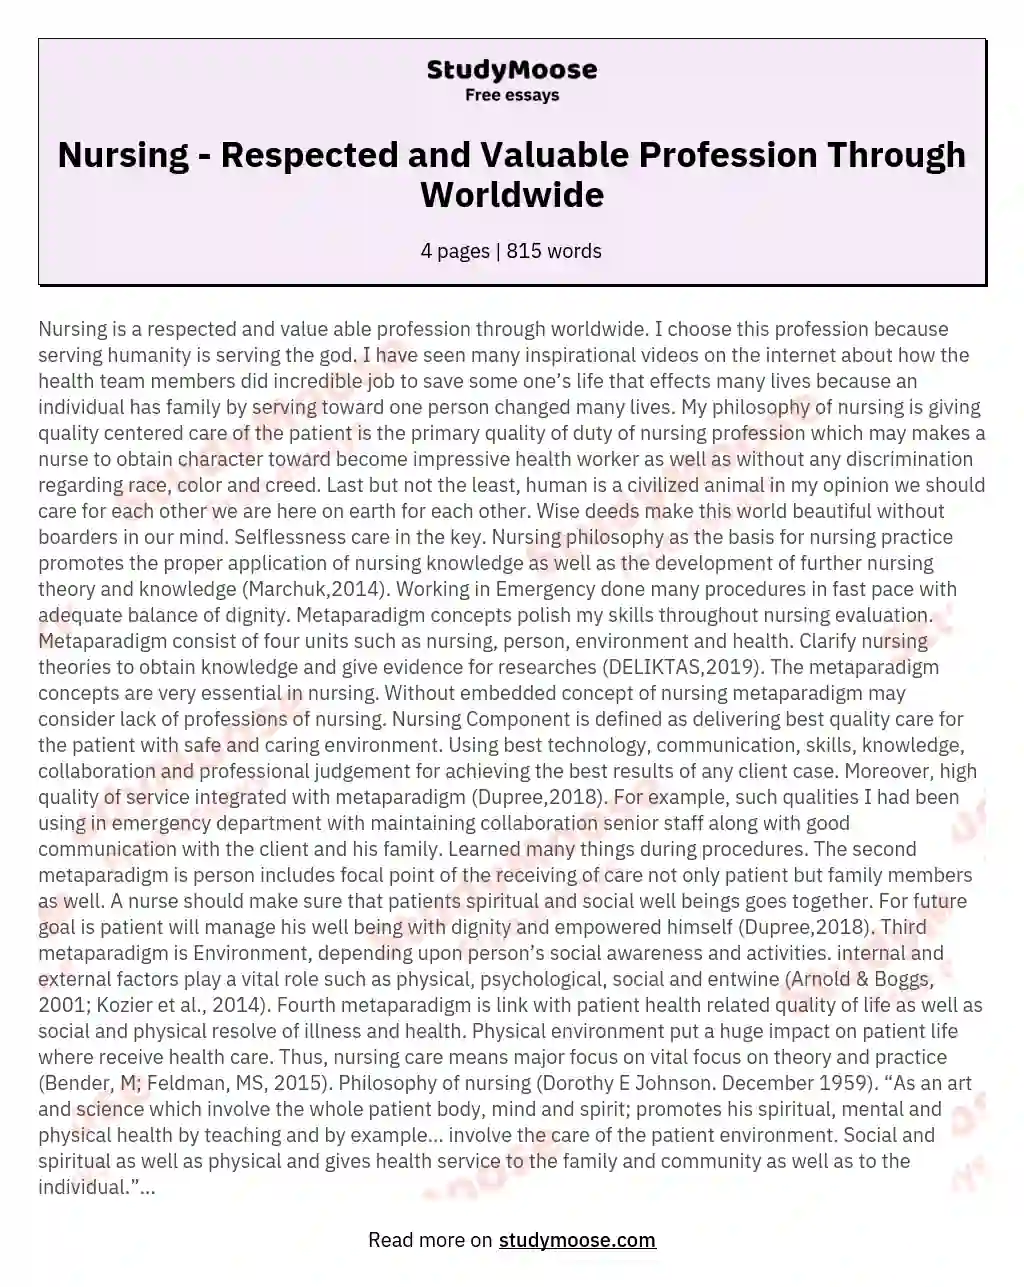 Nursing - Respected and Valuable Profession Through Worldwide